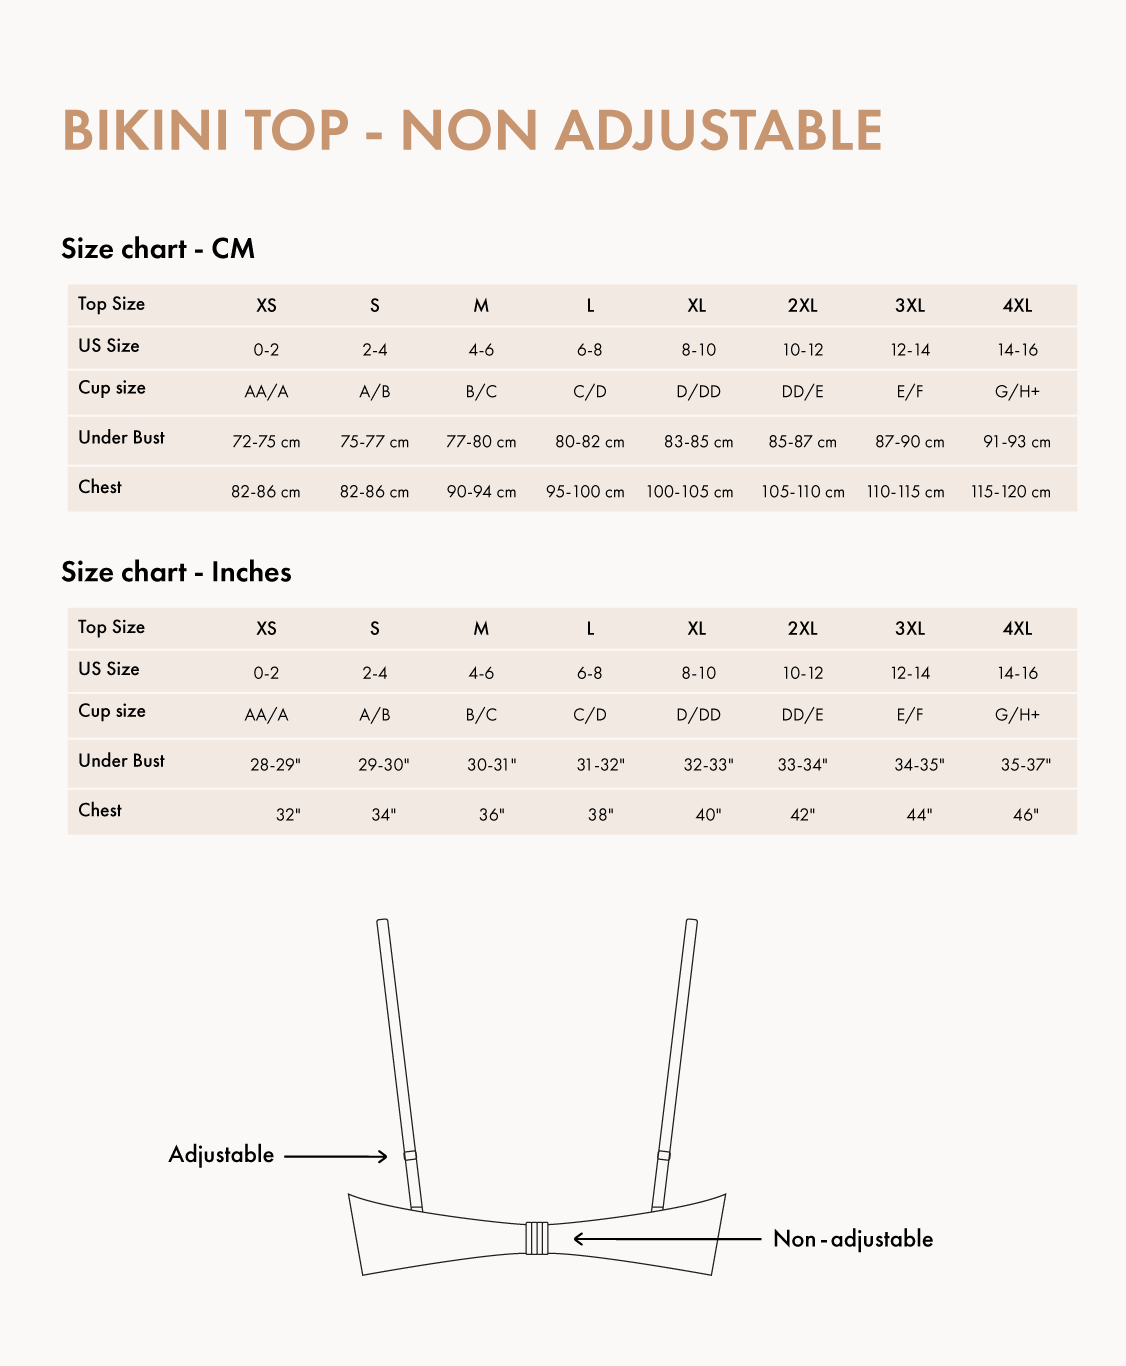 Biliblond non-adjustable top size chart